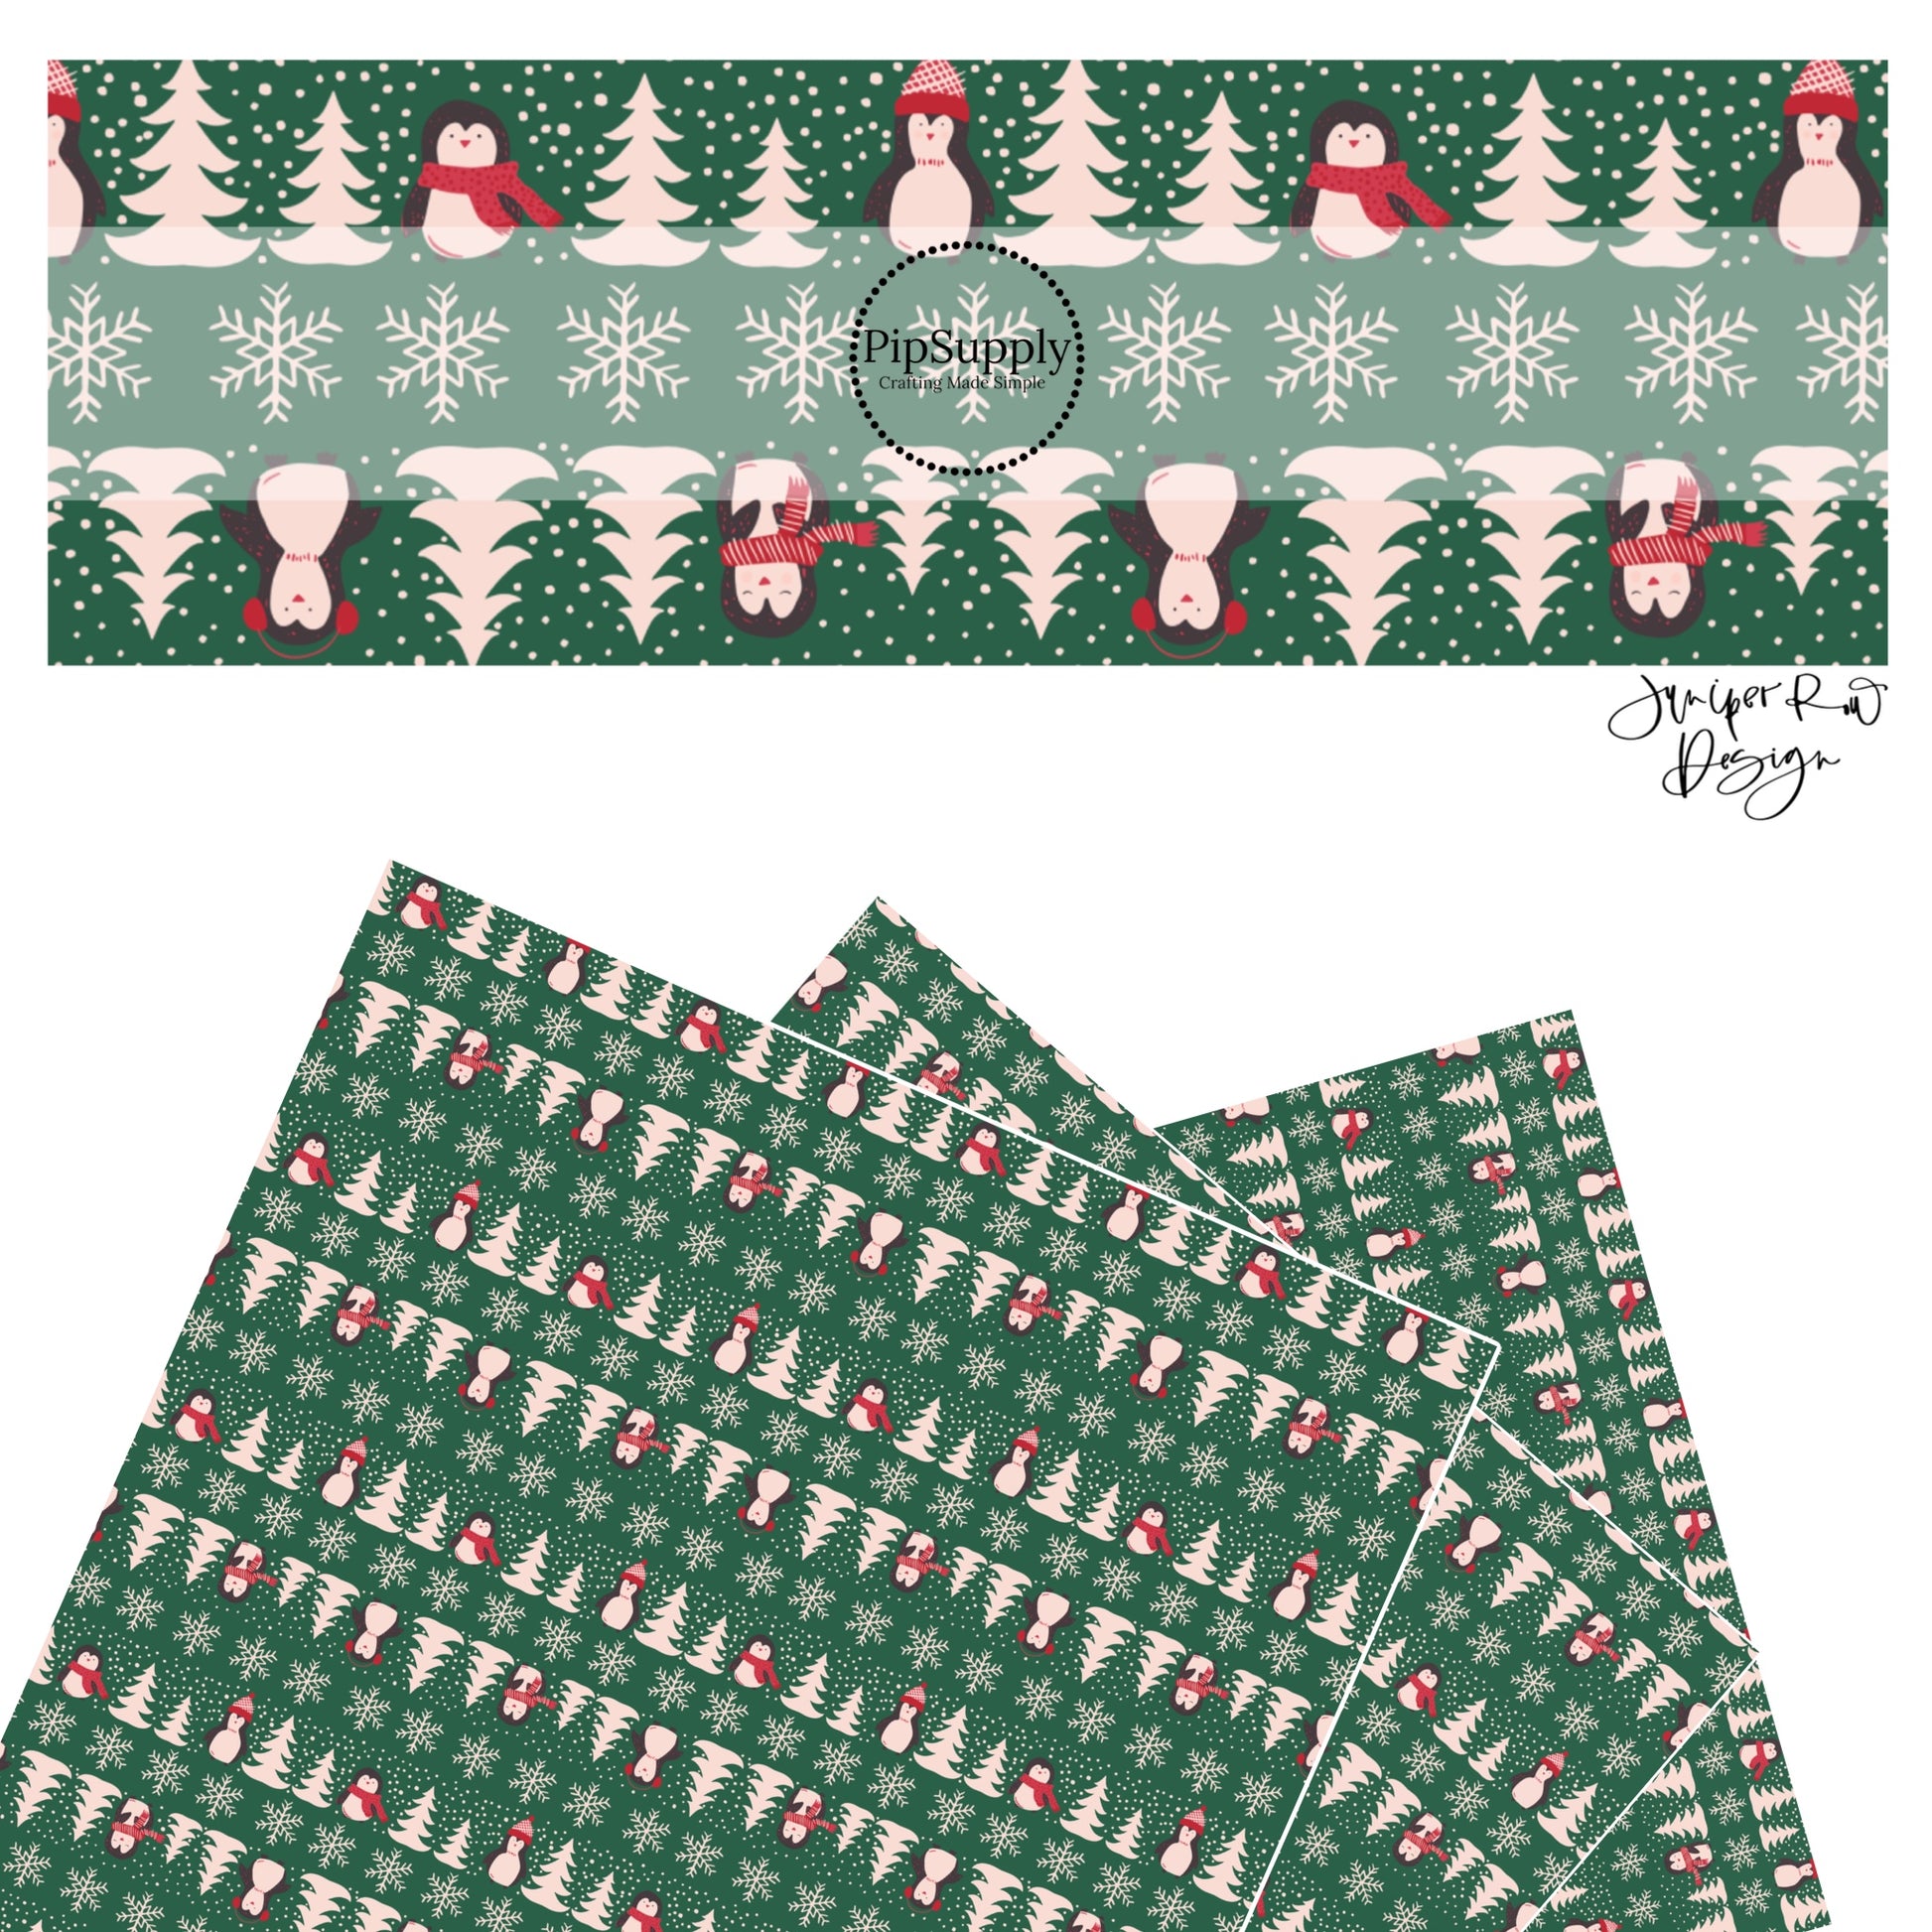 These holiday themed faux leather sheets contain the following design elements: penguins with scarves and hats surrounded by pine trees and snow flakes on green. Our CPSIA compliant faux leather sheets or rolls can be used for all types of crafting projects.